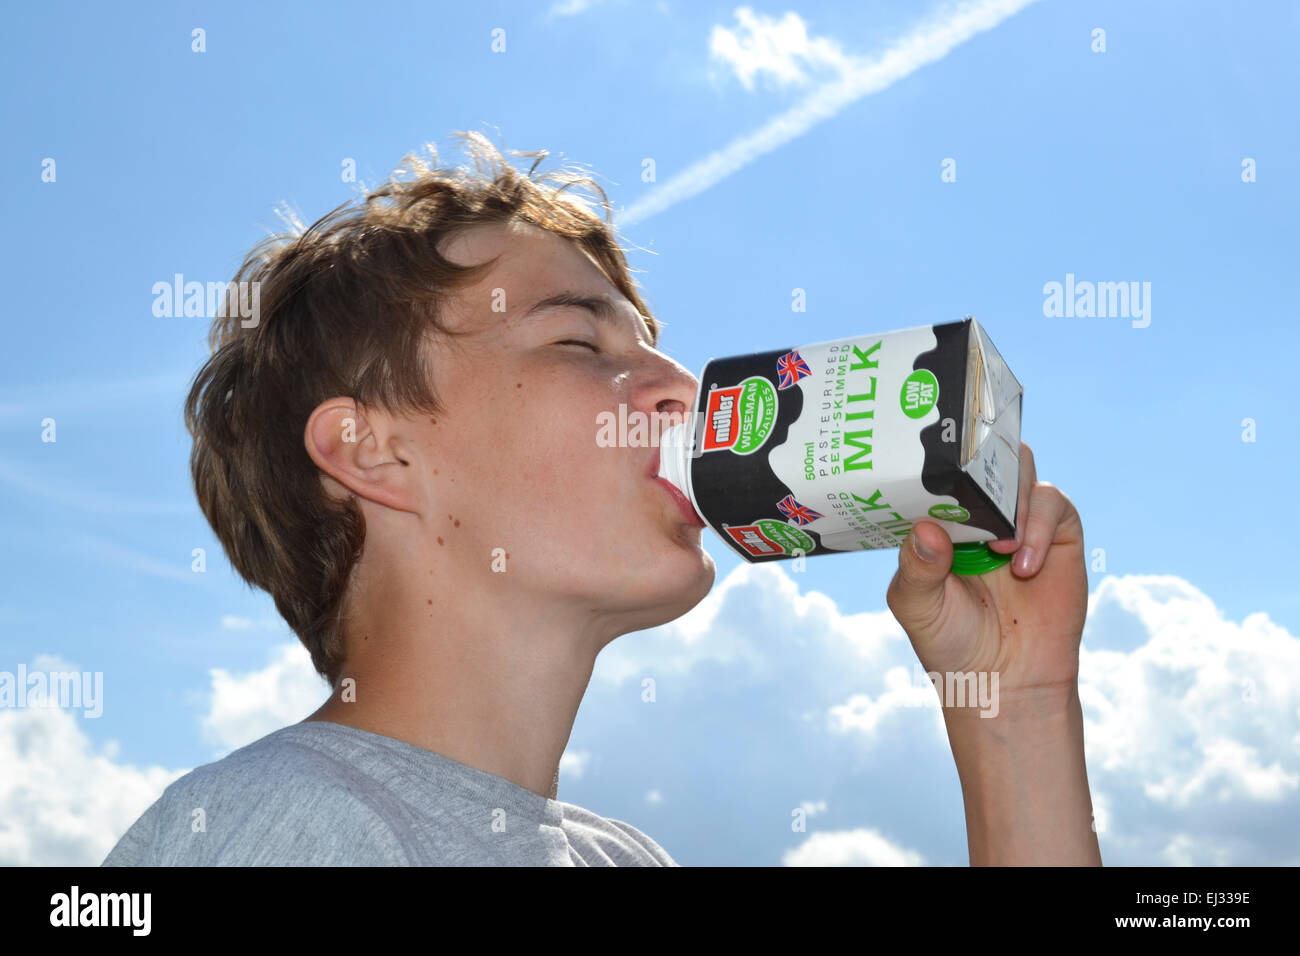 young boy drinking from a milk carton in the summer Stock Photo